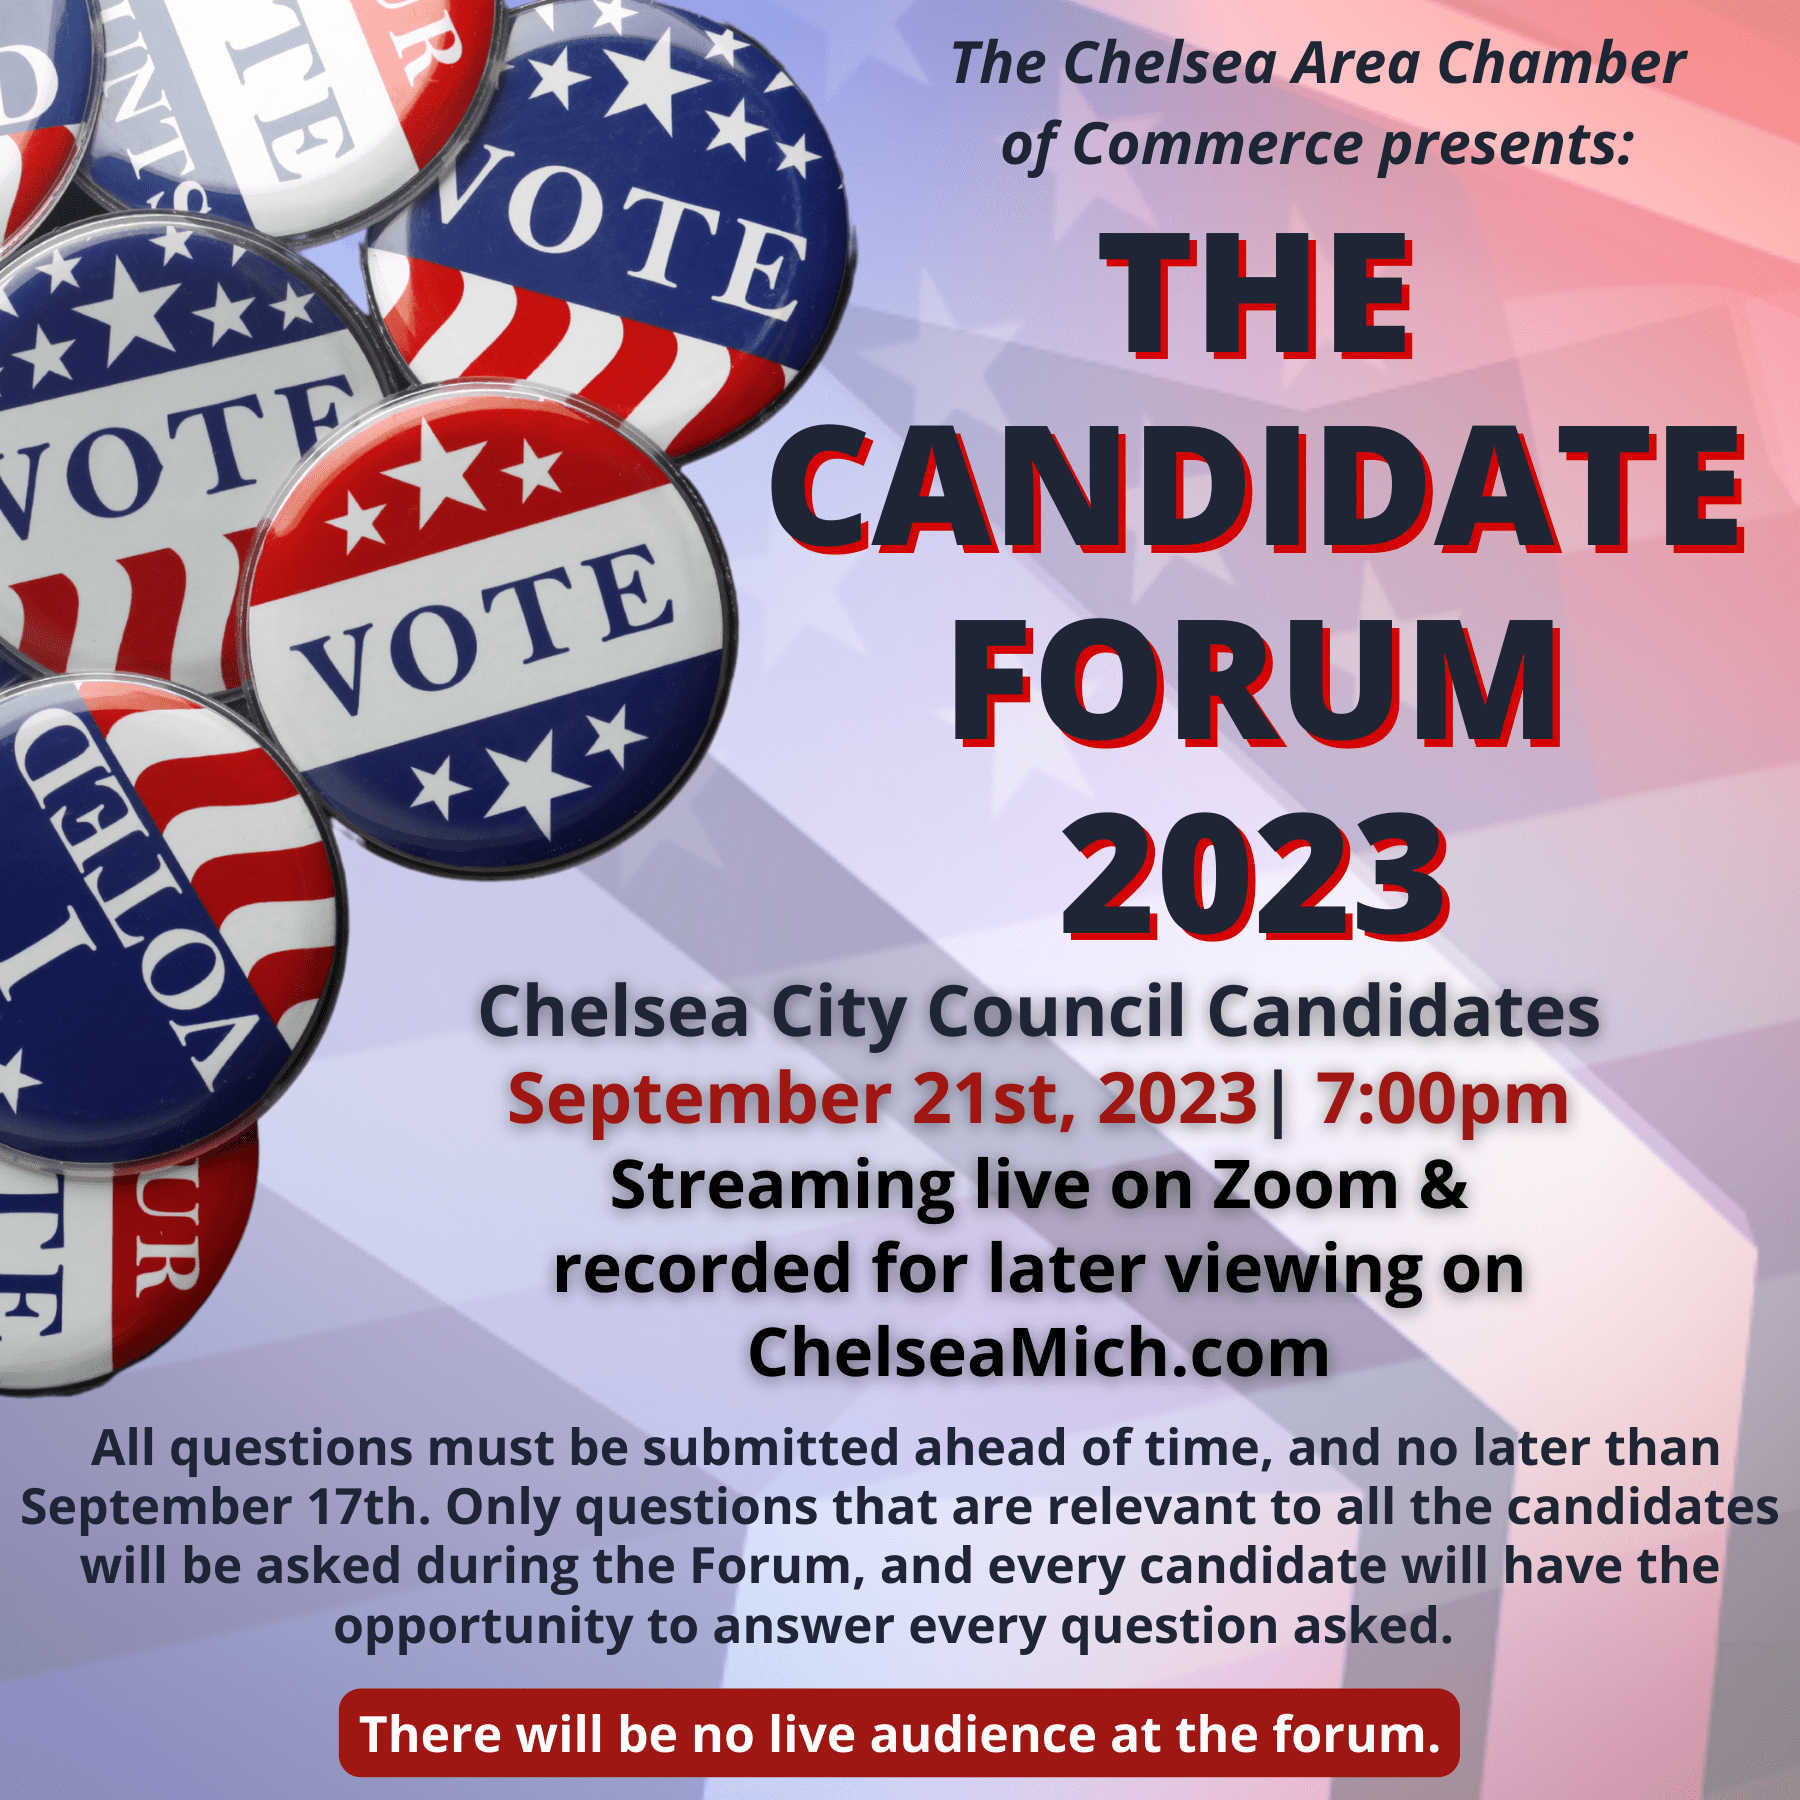 Council President Candidate Forum a Week Away, Submit Your